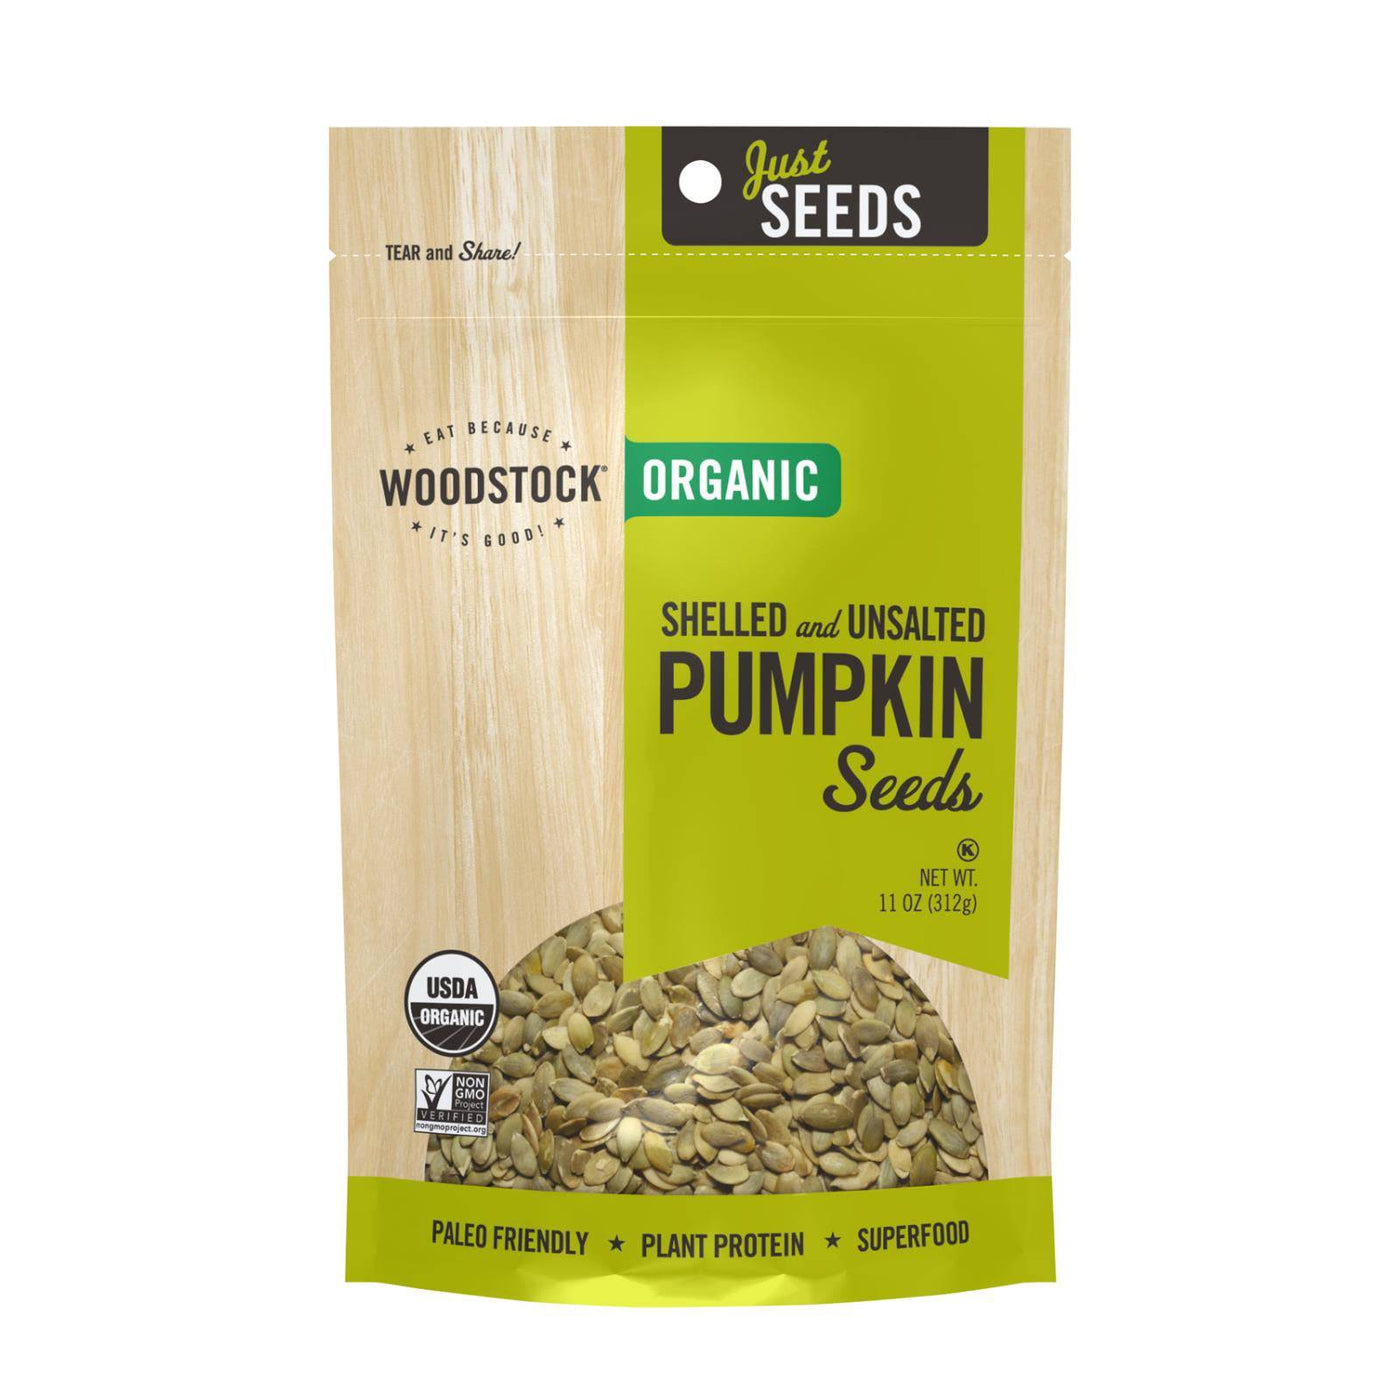 Woodstock Organic Shelled And Unsalted Pumpkin Seeds - Case Of 8 - 11 Oz | OnlyNaturals.us